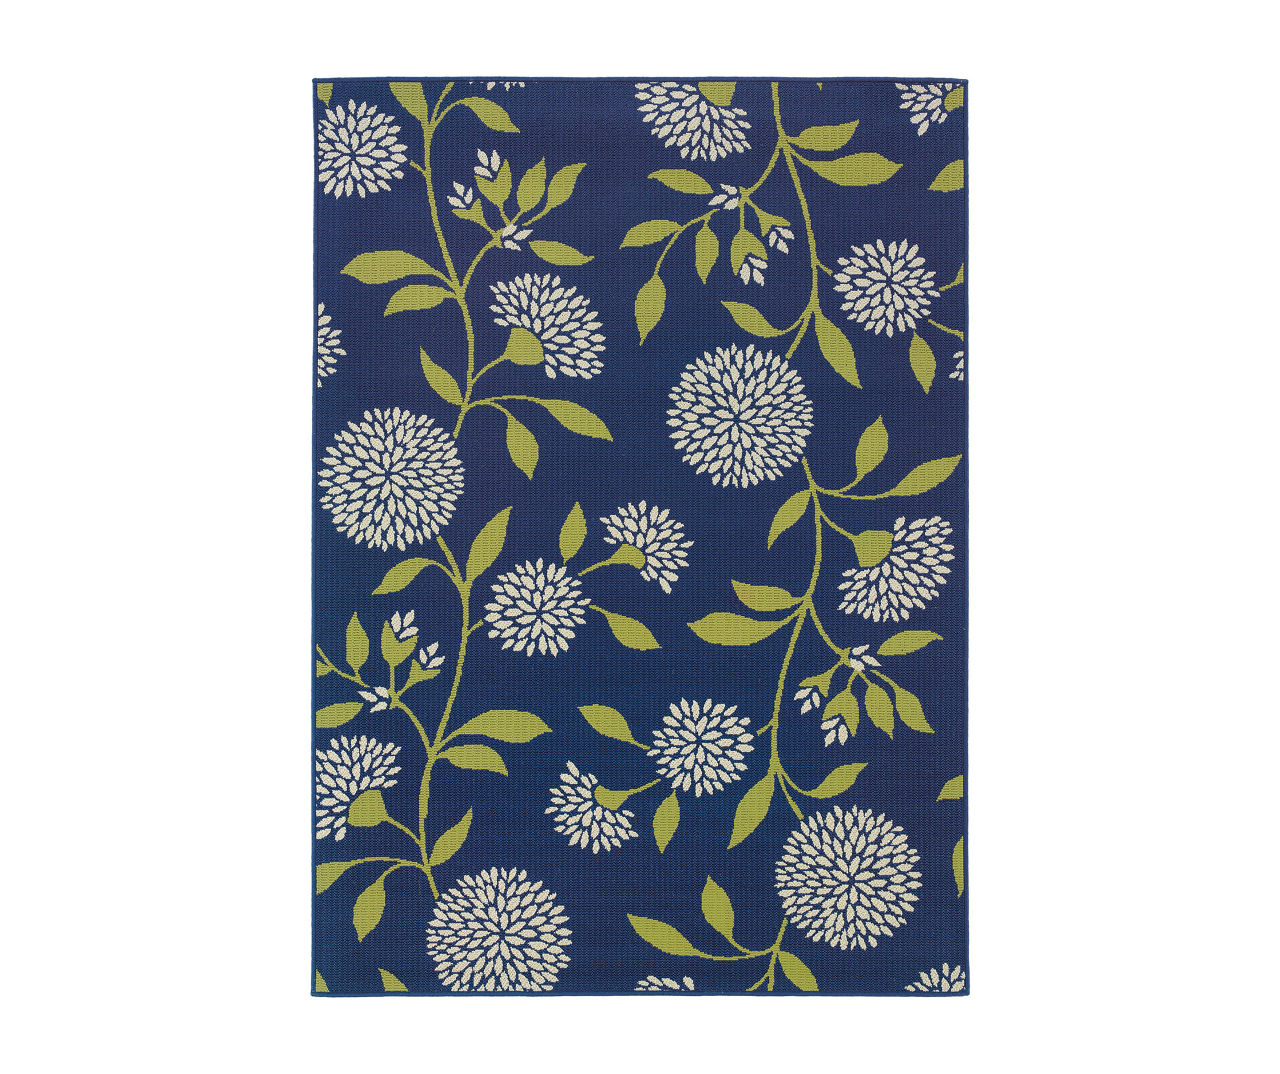 Heather Floral Outdoor Area Rug, (6'7" x 9'6")